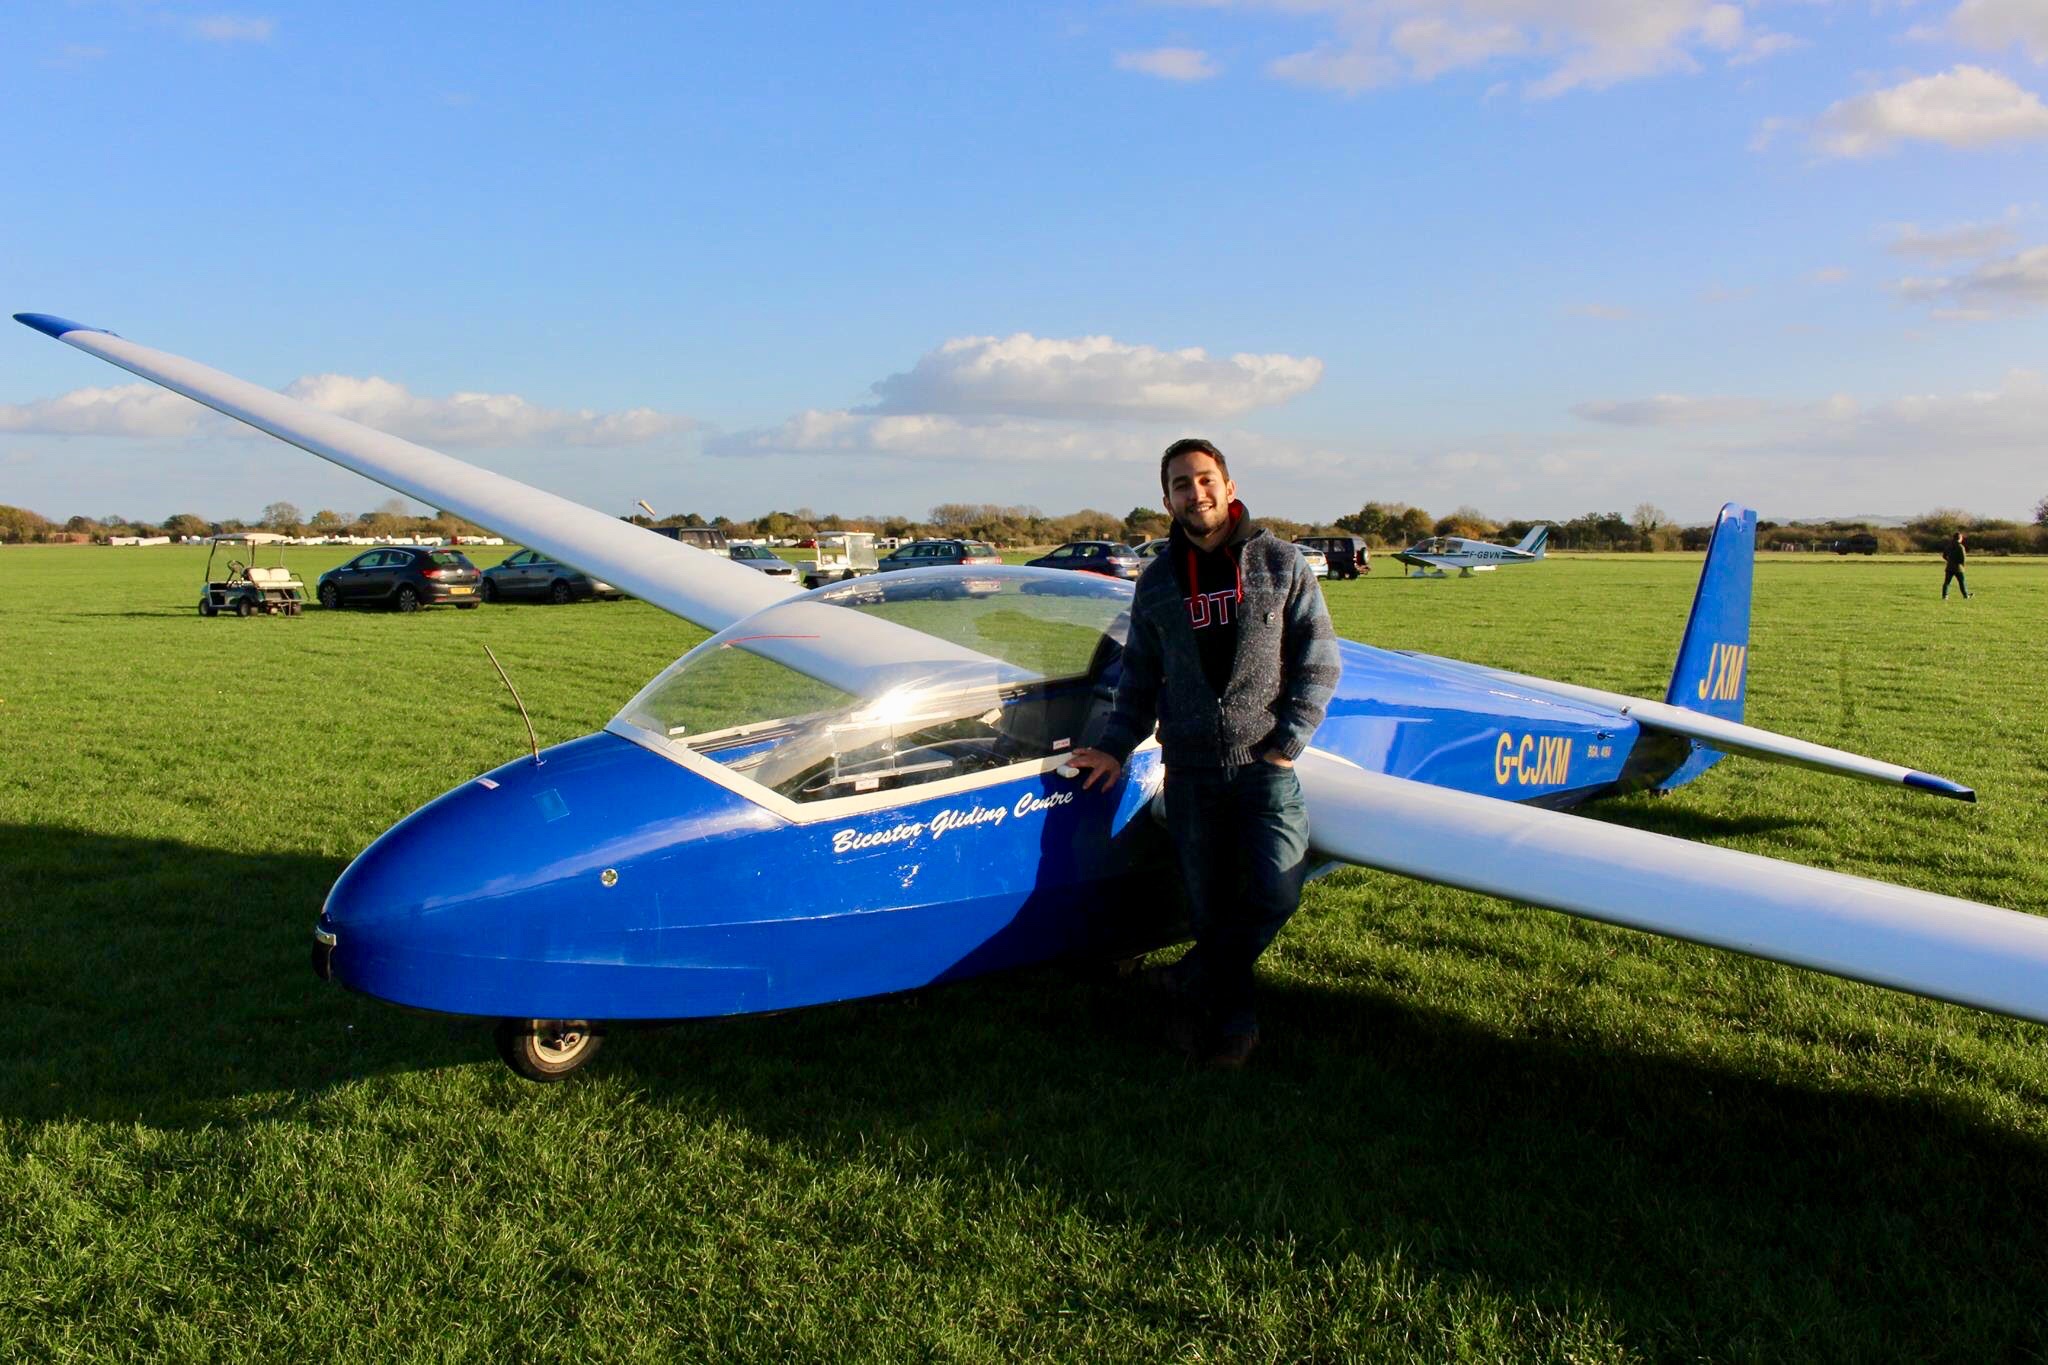 ‘Gliding’ is this Turkish scholar’s favourite pastime at the University of Oxford